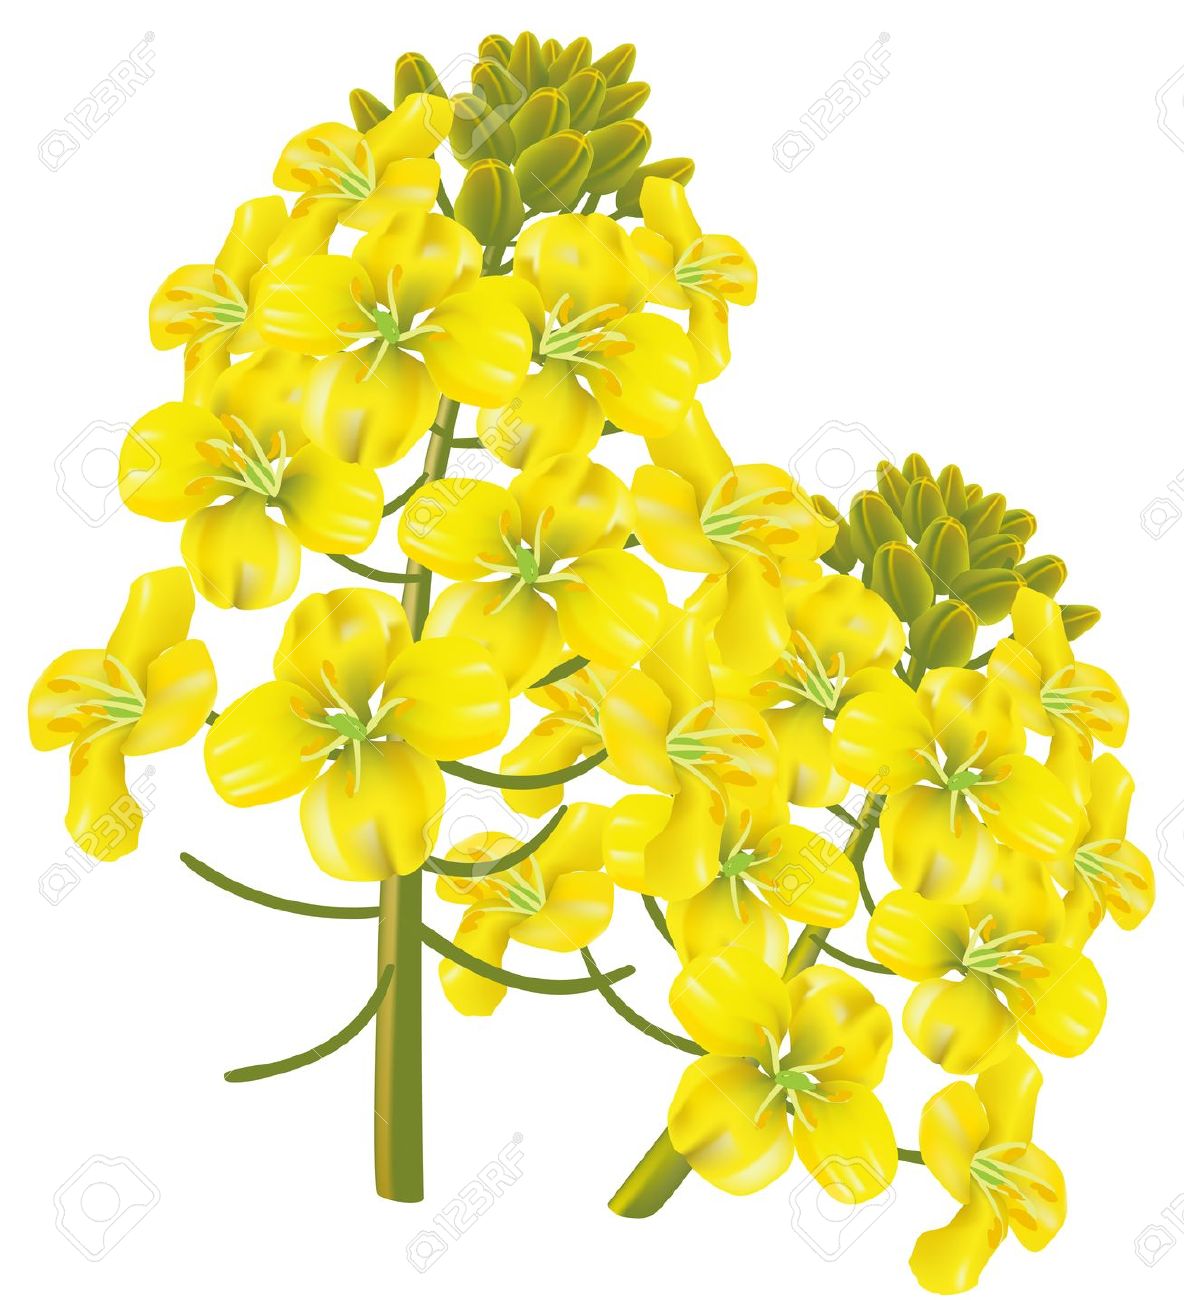 Canola clipart #6, Download drawings